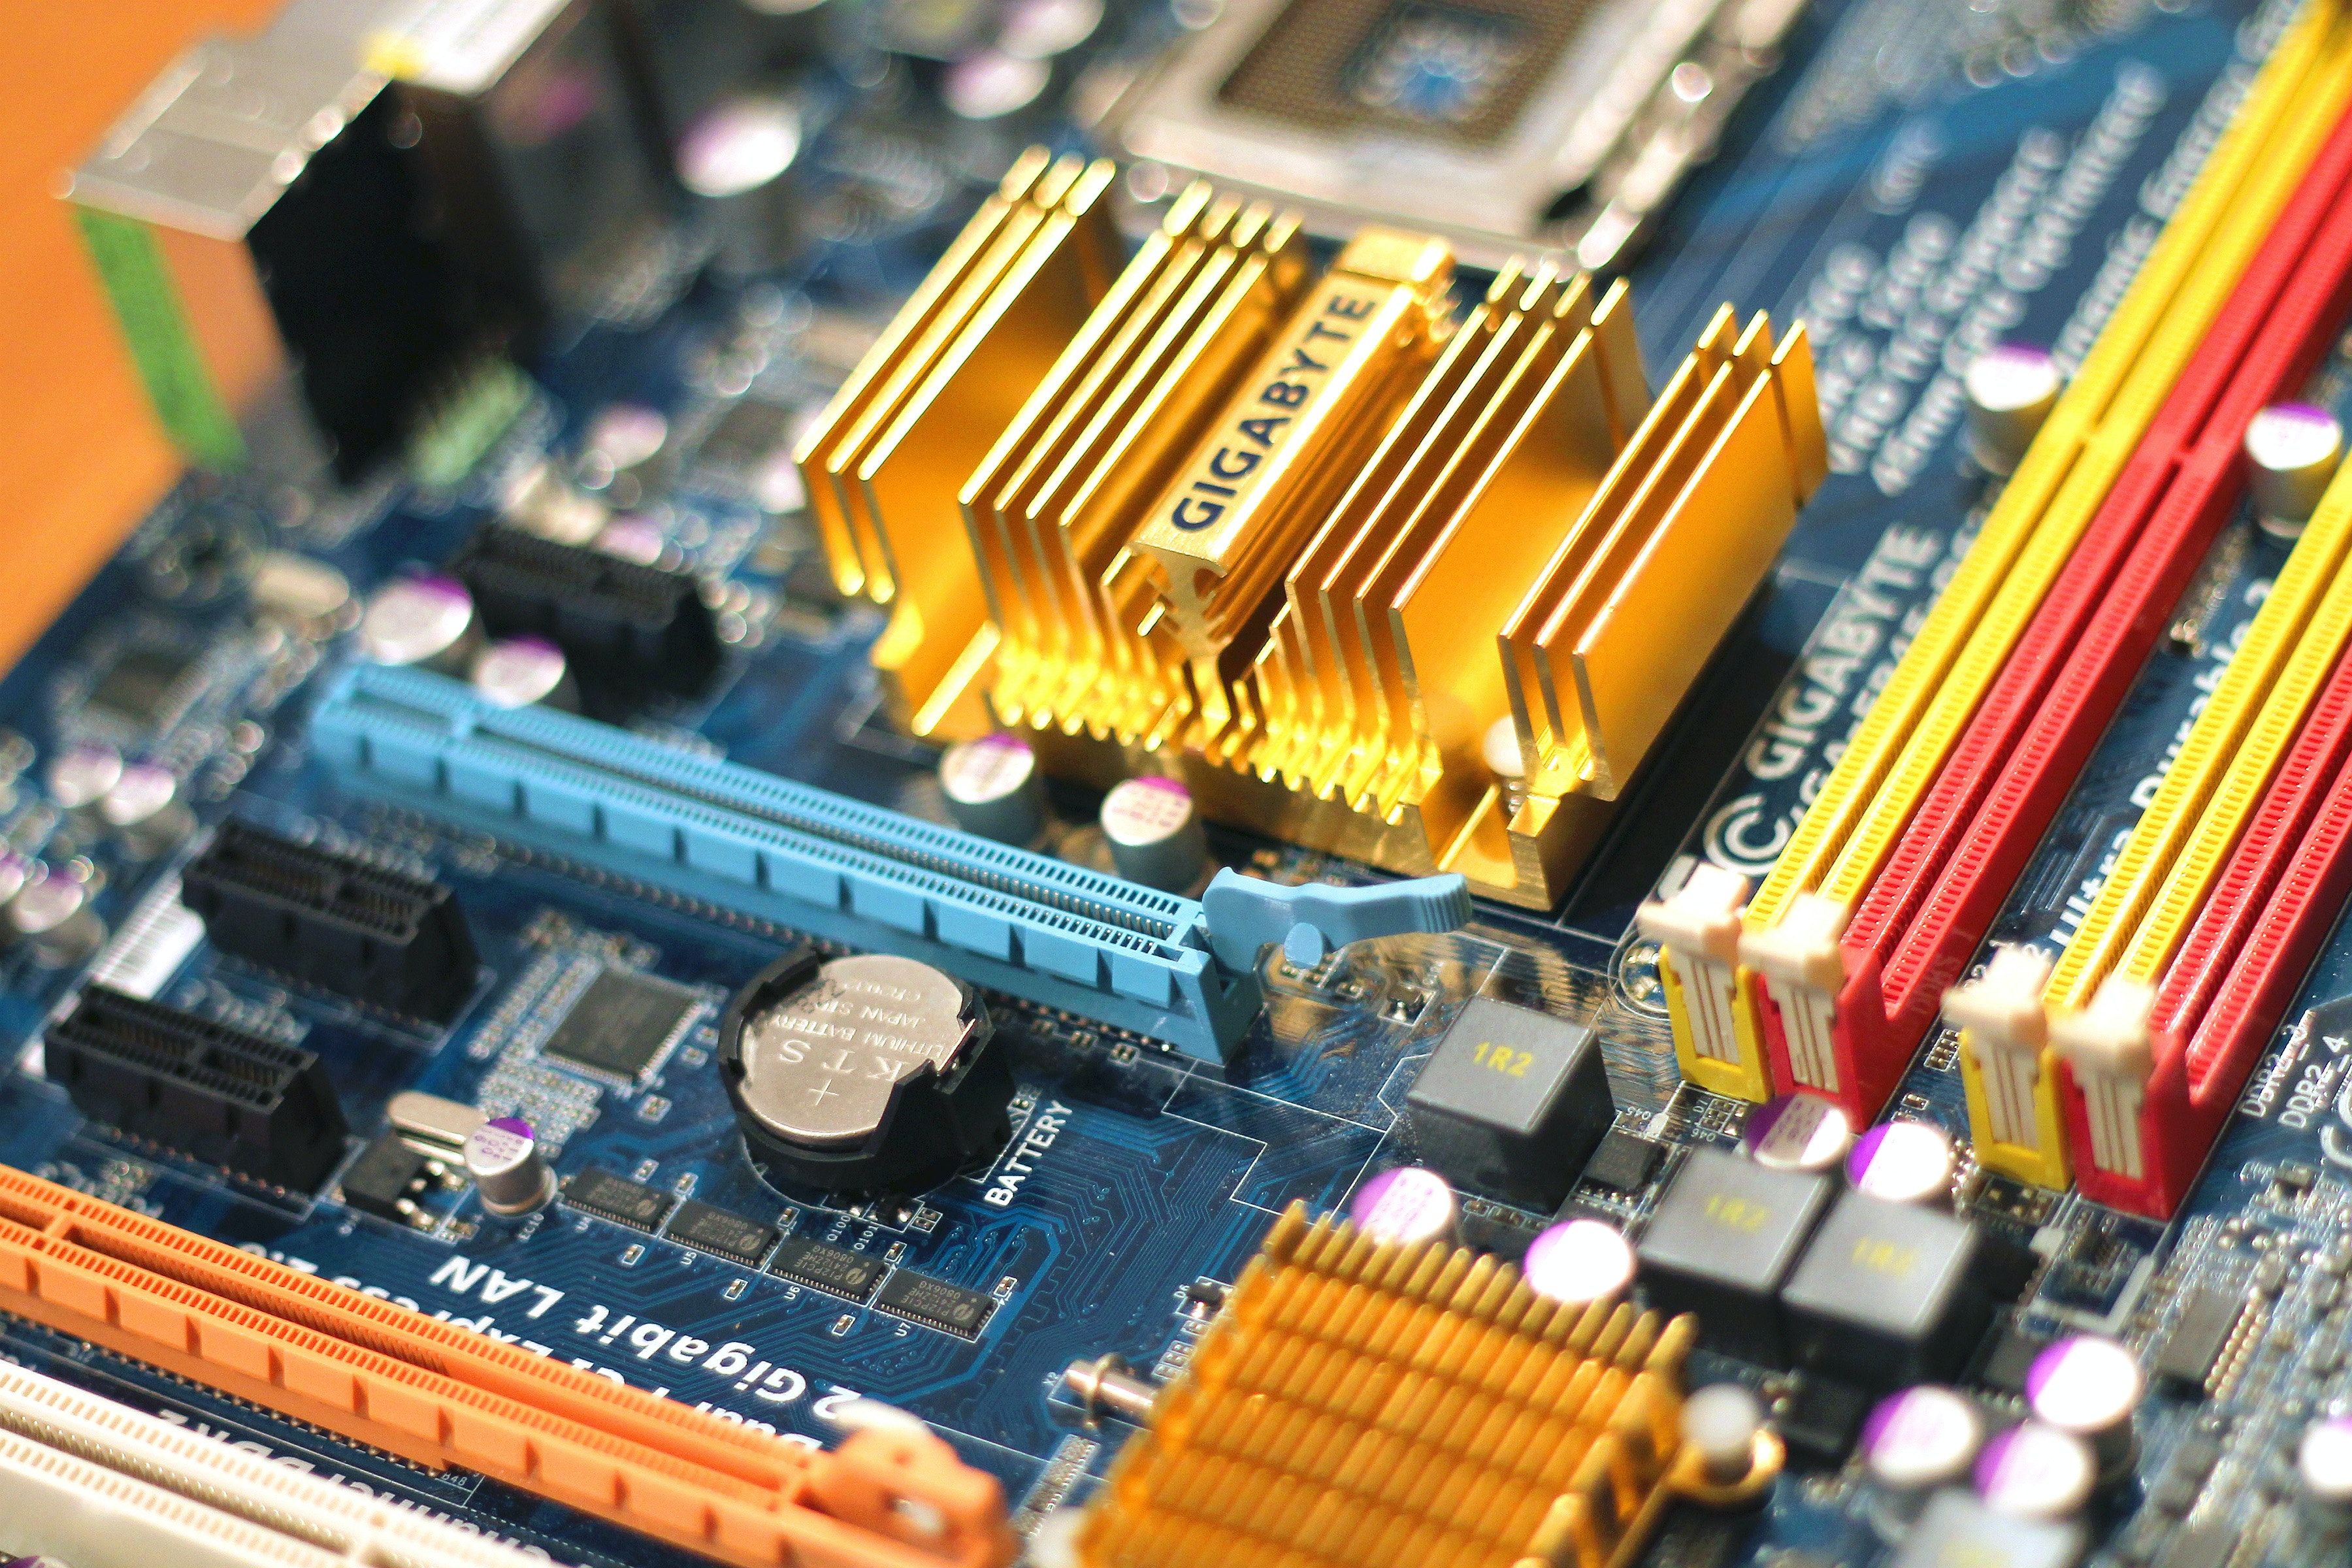 Personal computer motherboard · Free Stock Photo